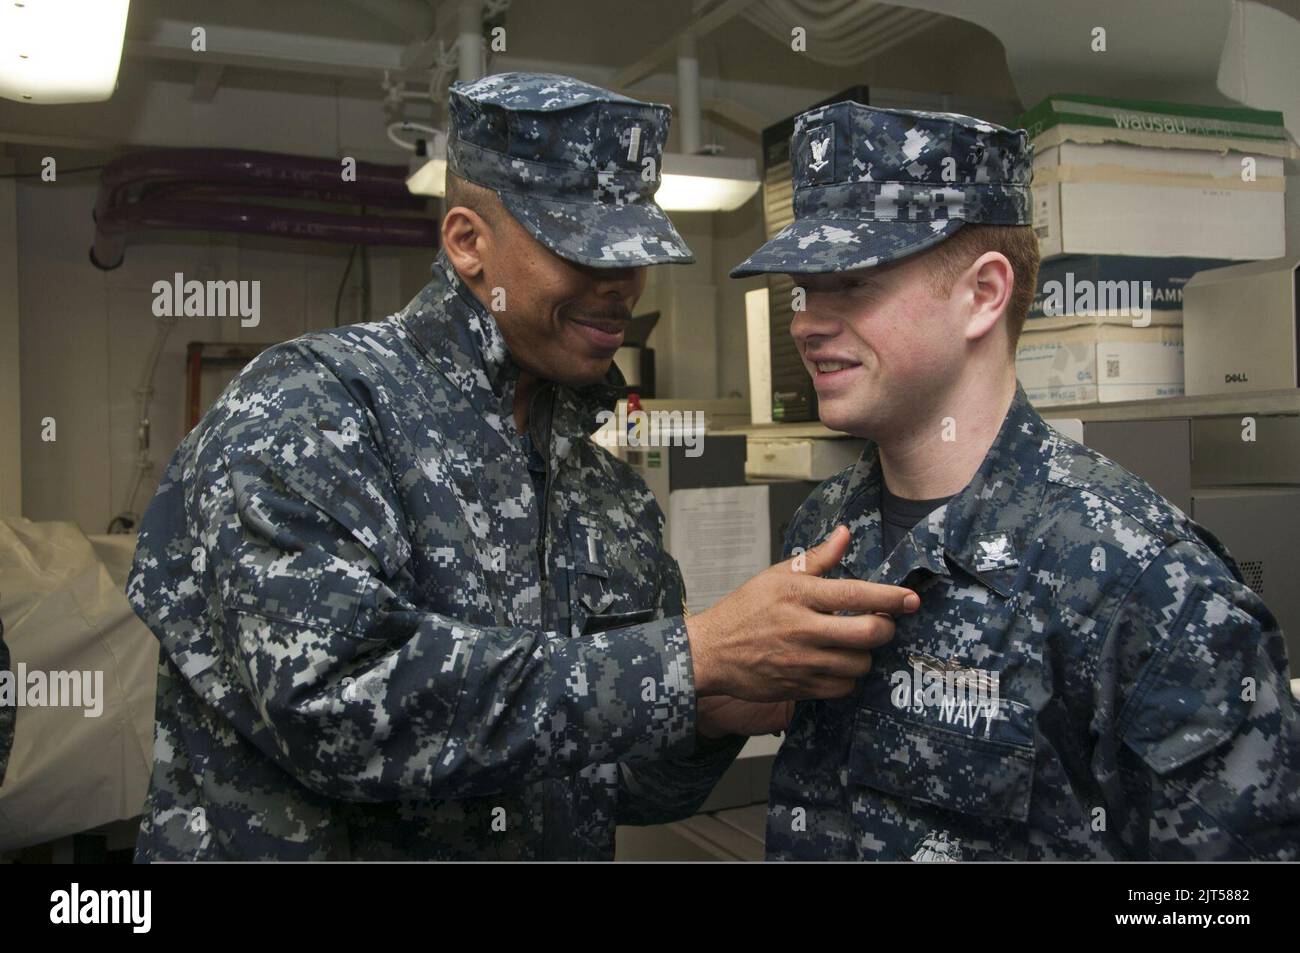 U.S. Navy Mass Communication Specialist 3rd Class right, is awarded an enlisted surface warfare specialist pin by Lt. j.g. the assistant public affairs officer for the aircraft 140115 Stock Photo